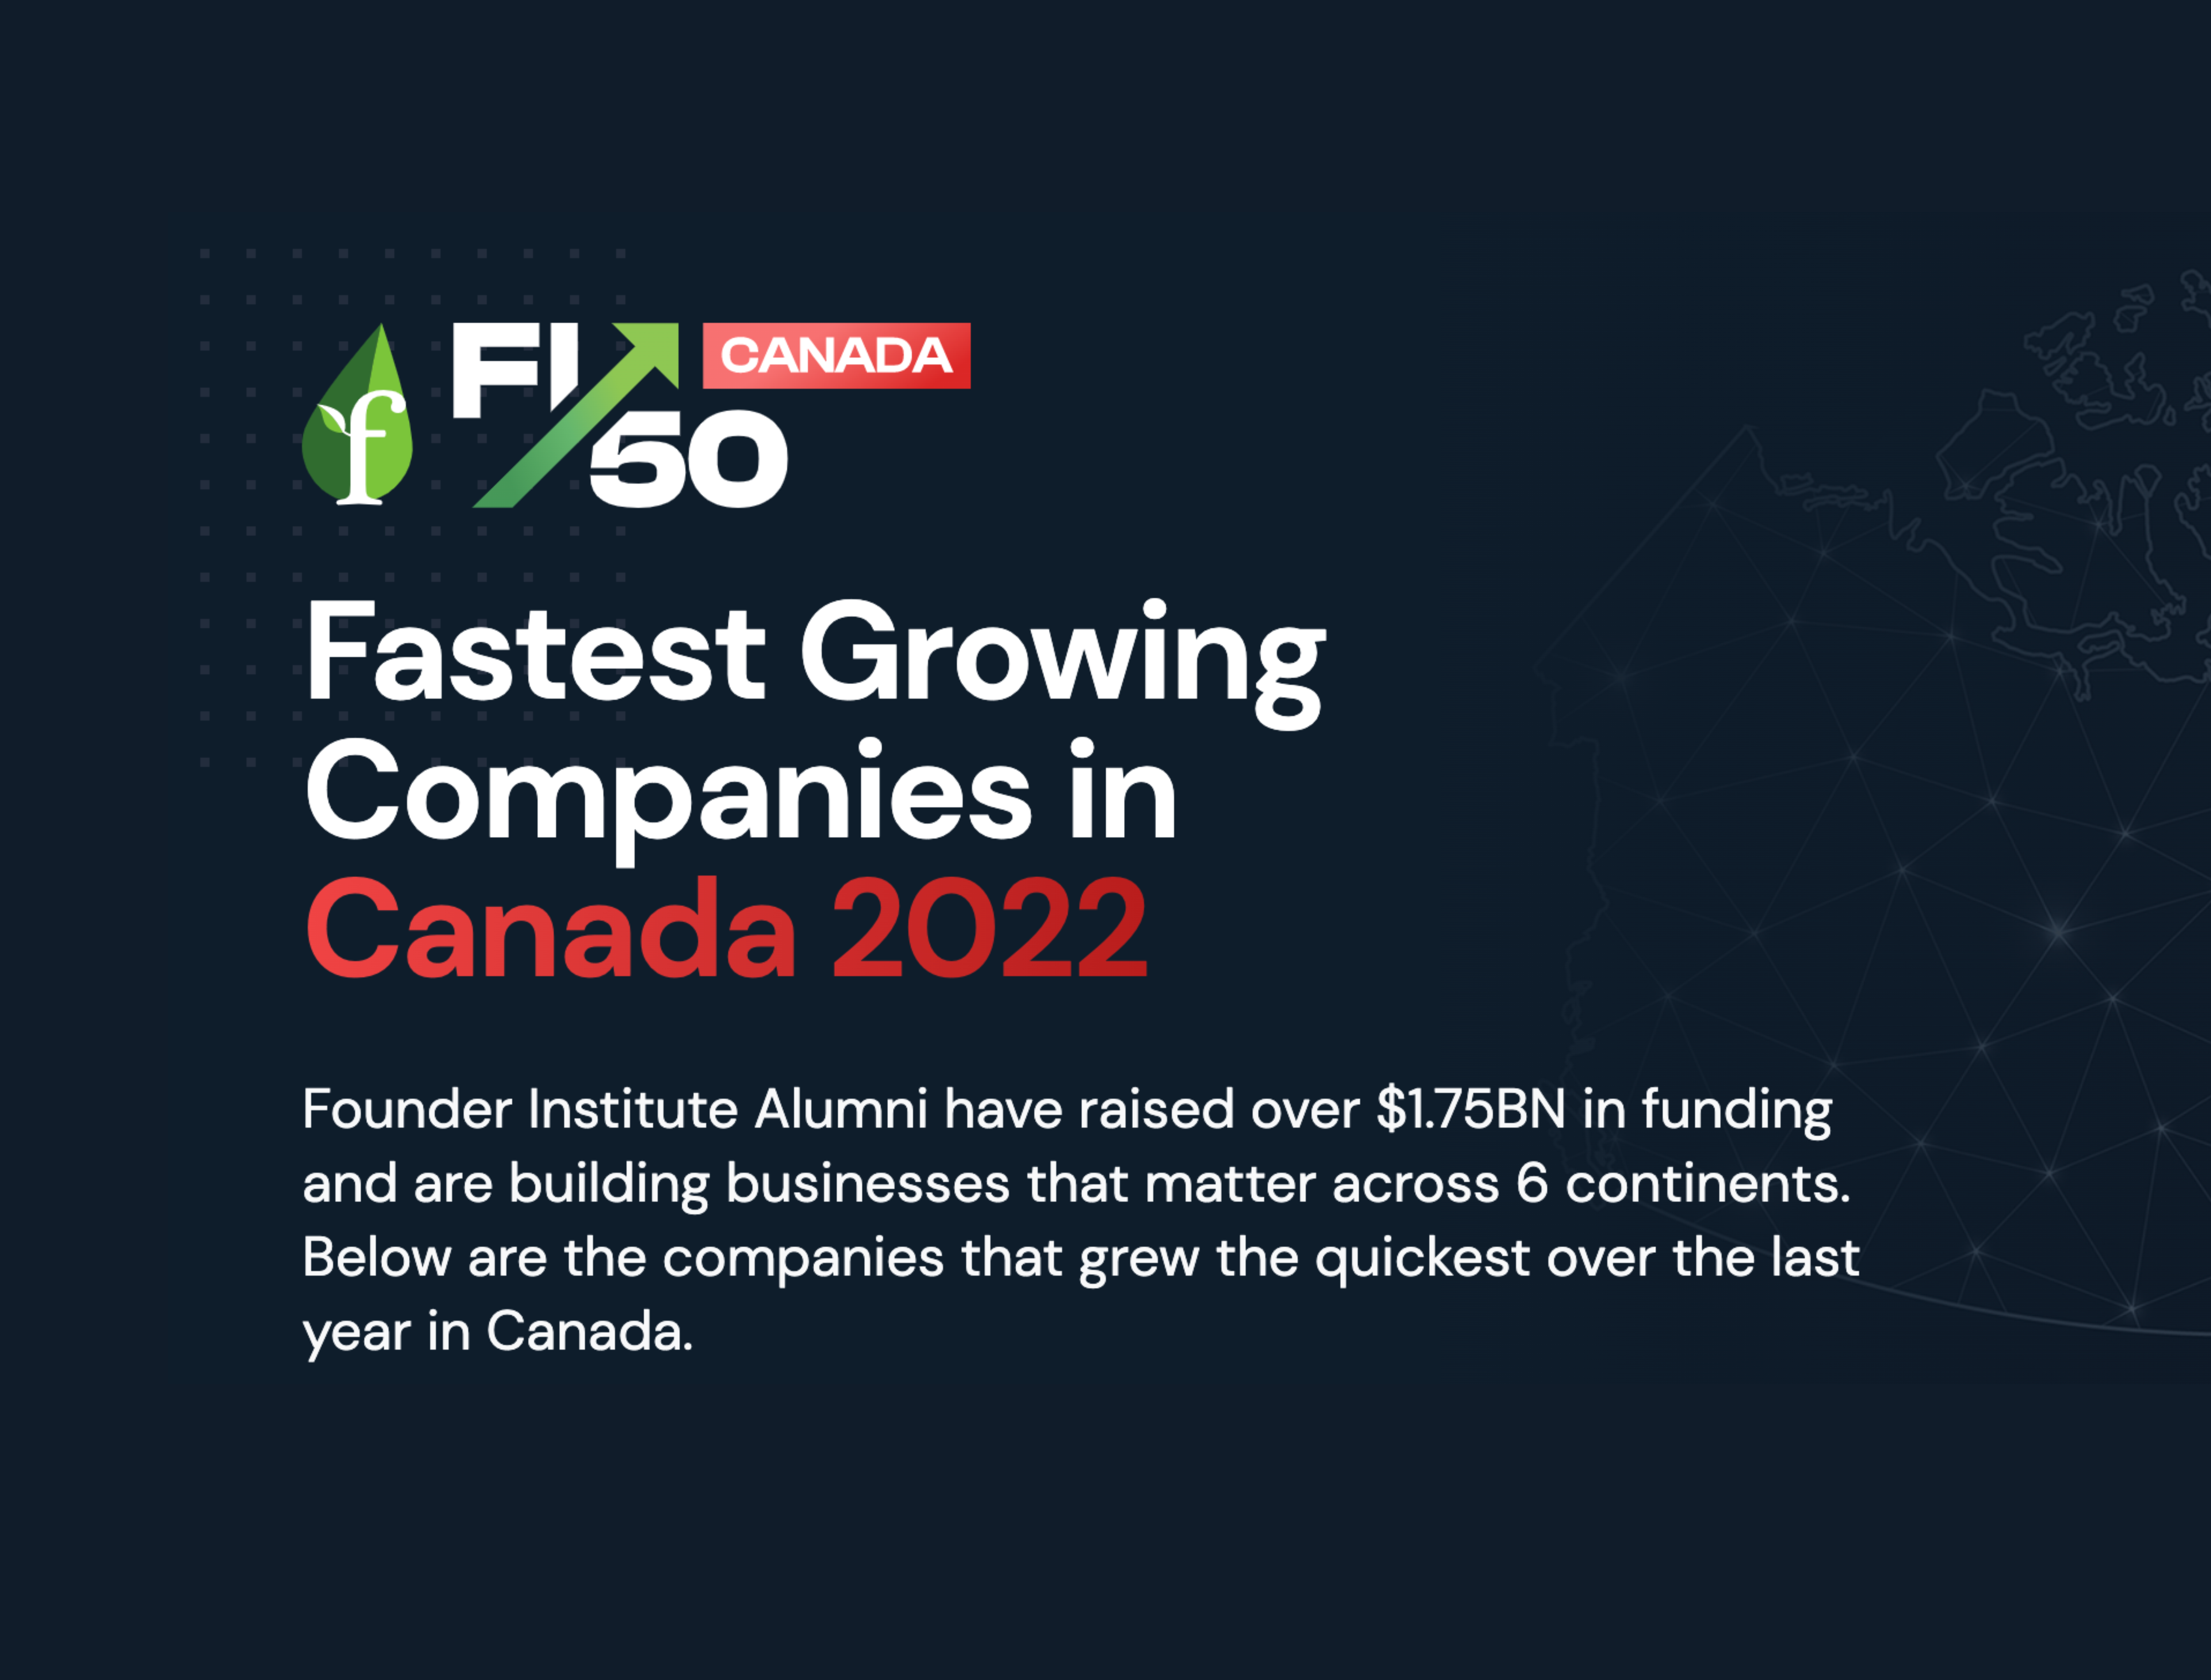 SuperVisas Named One of The 50 Fastest Growing Canadian Companies by Founder Institute in 2022